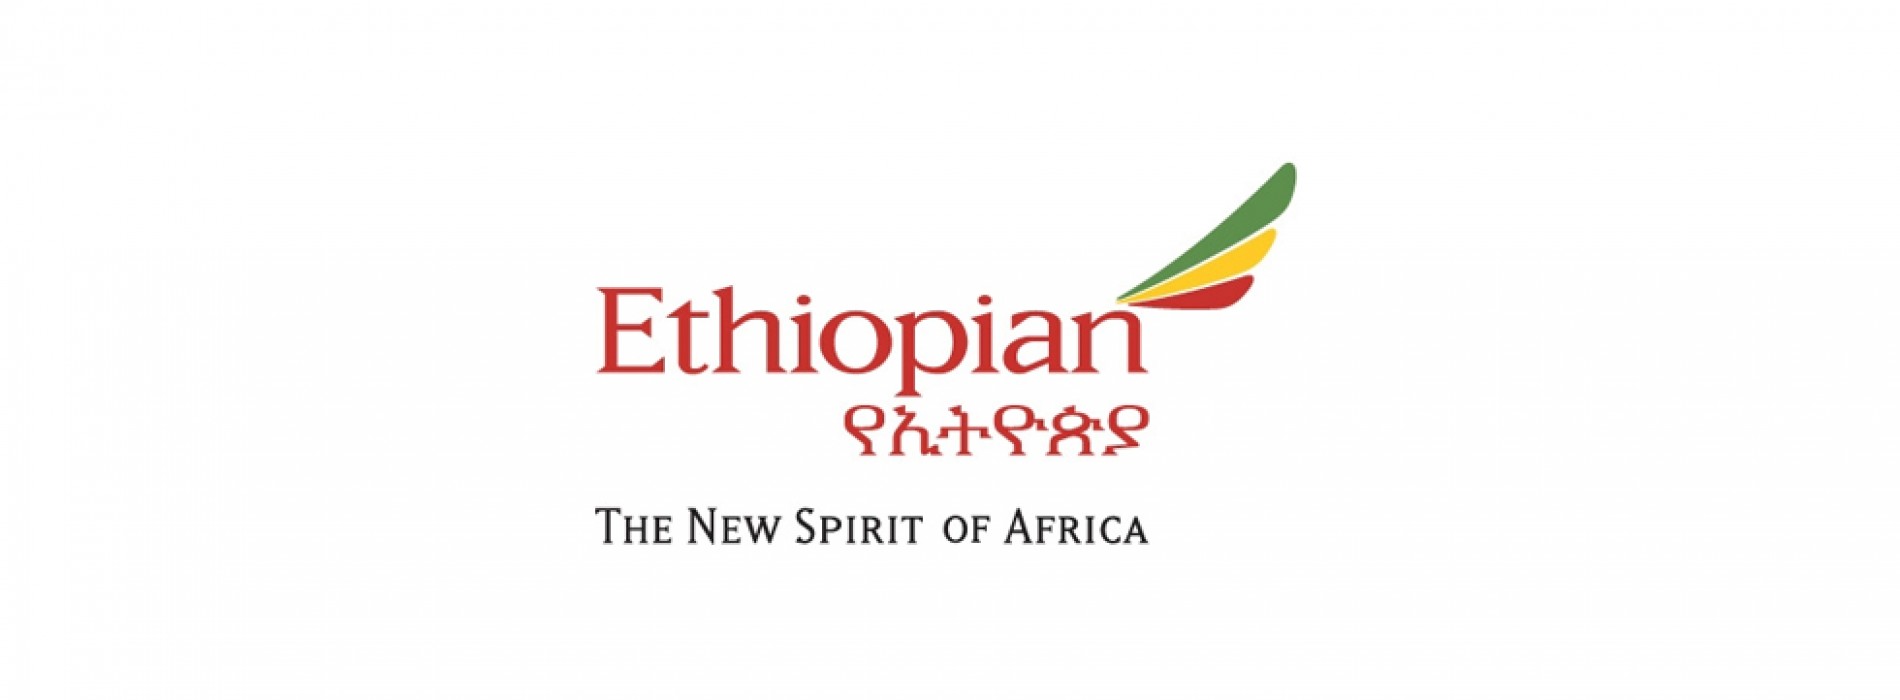 Ethiopian will start direct and non-stop services to Singapore